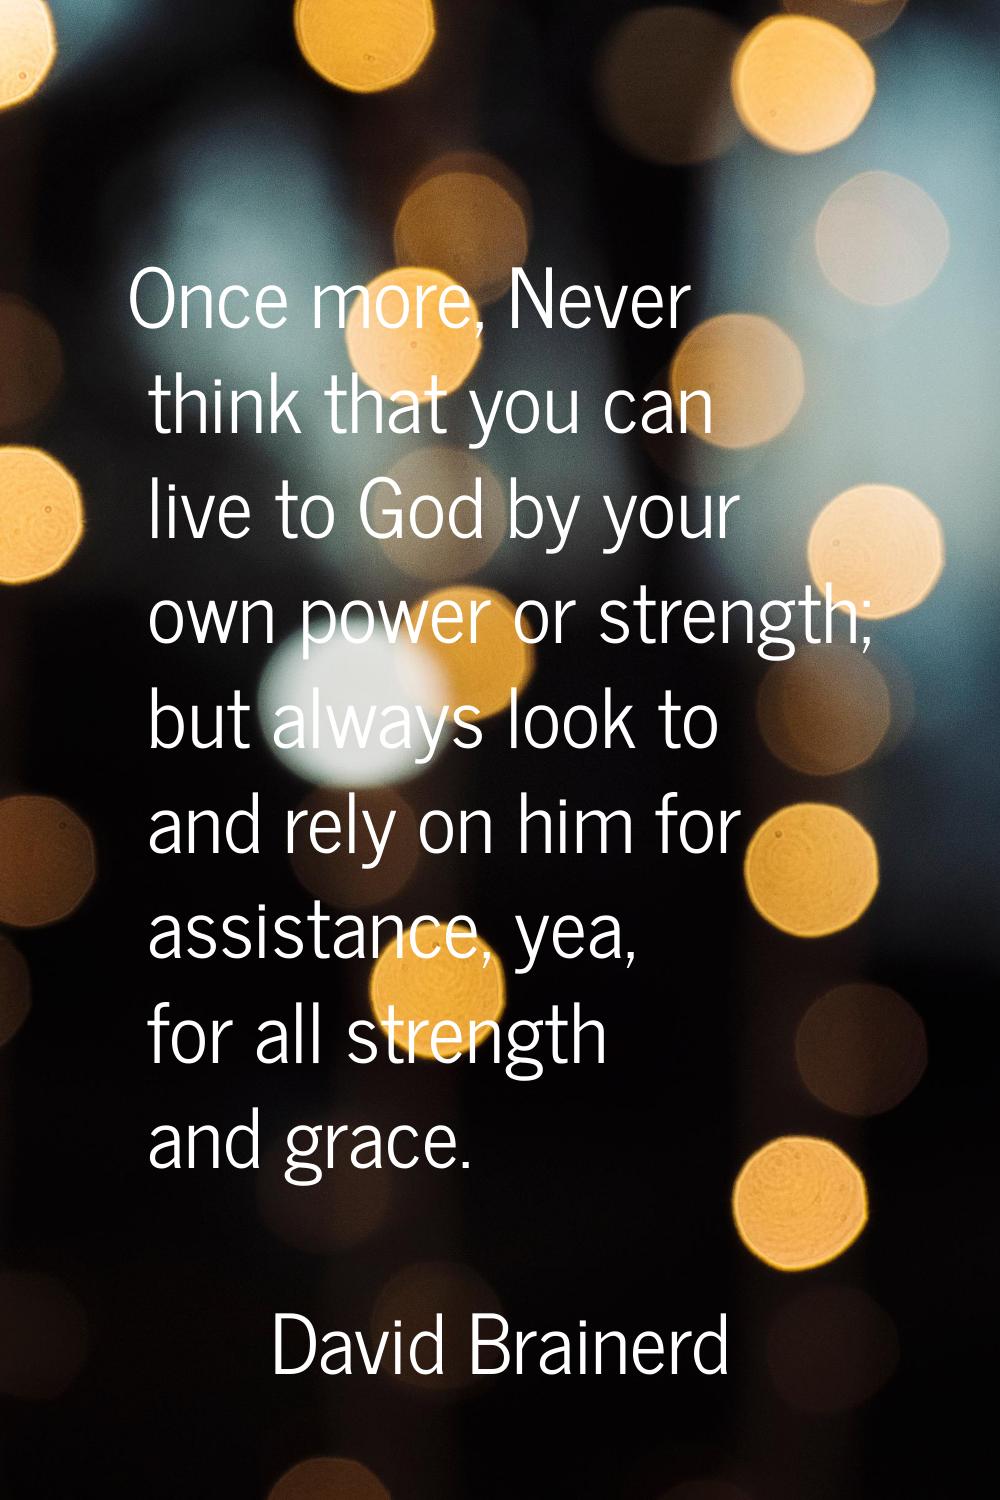 Once more, Never think that you can live to God by your own power or strength; but always look to a